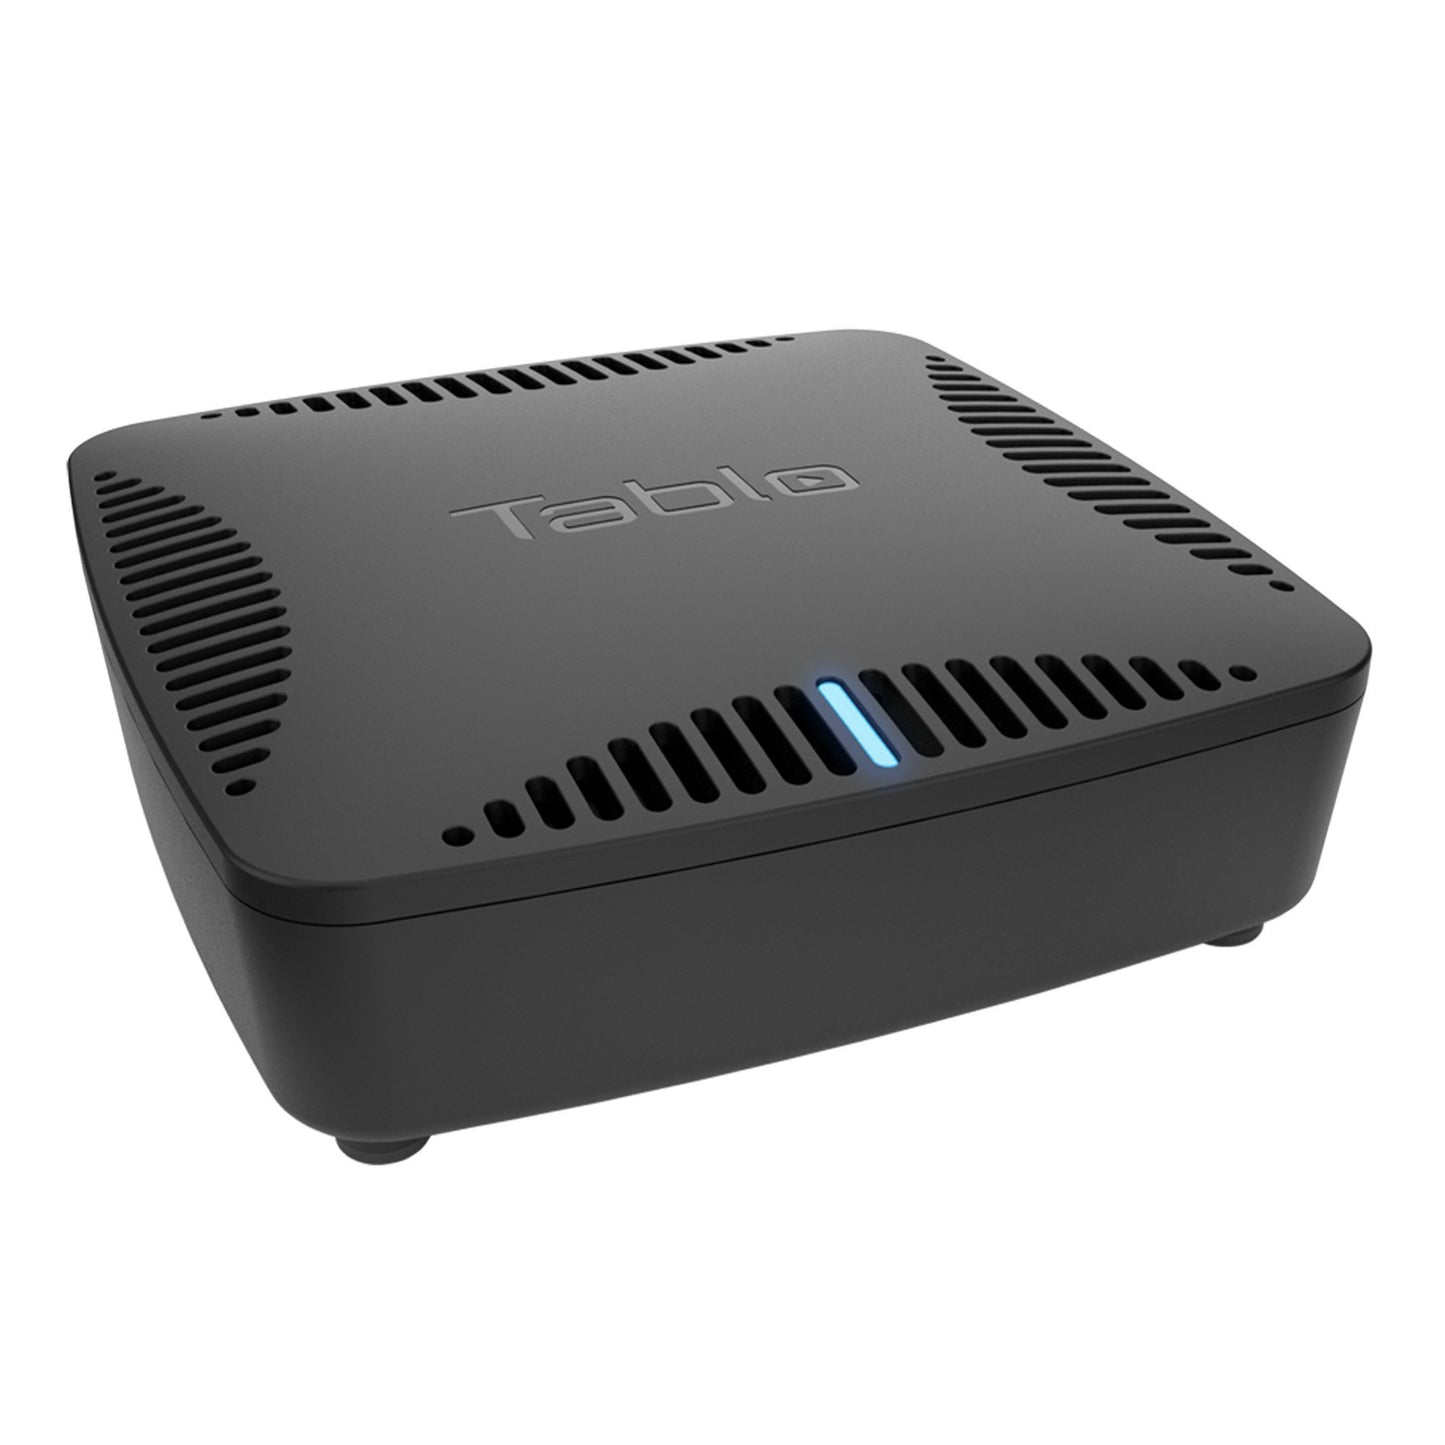 Tablo DUAL LITE Over-The-Air (OTA) DVR (Digital Video Recorder) for Cord Cutters. DVR hardware side view.